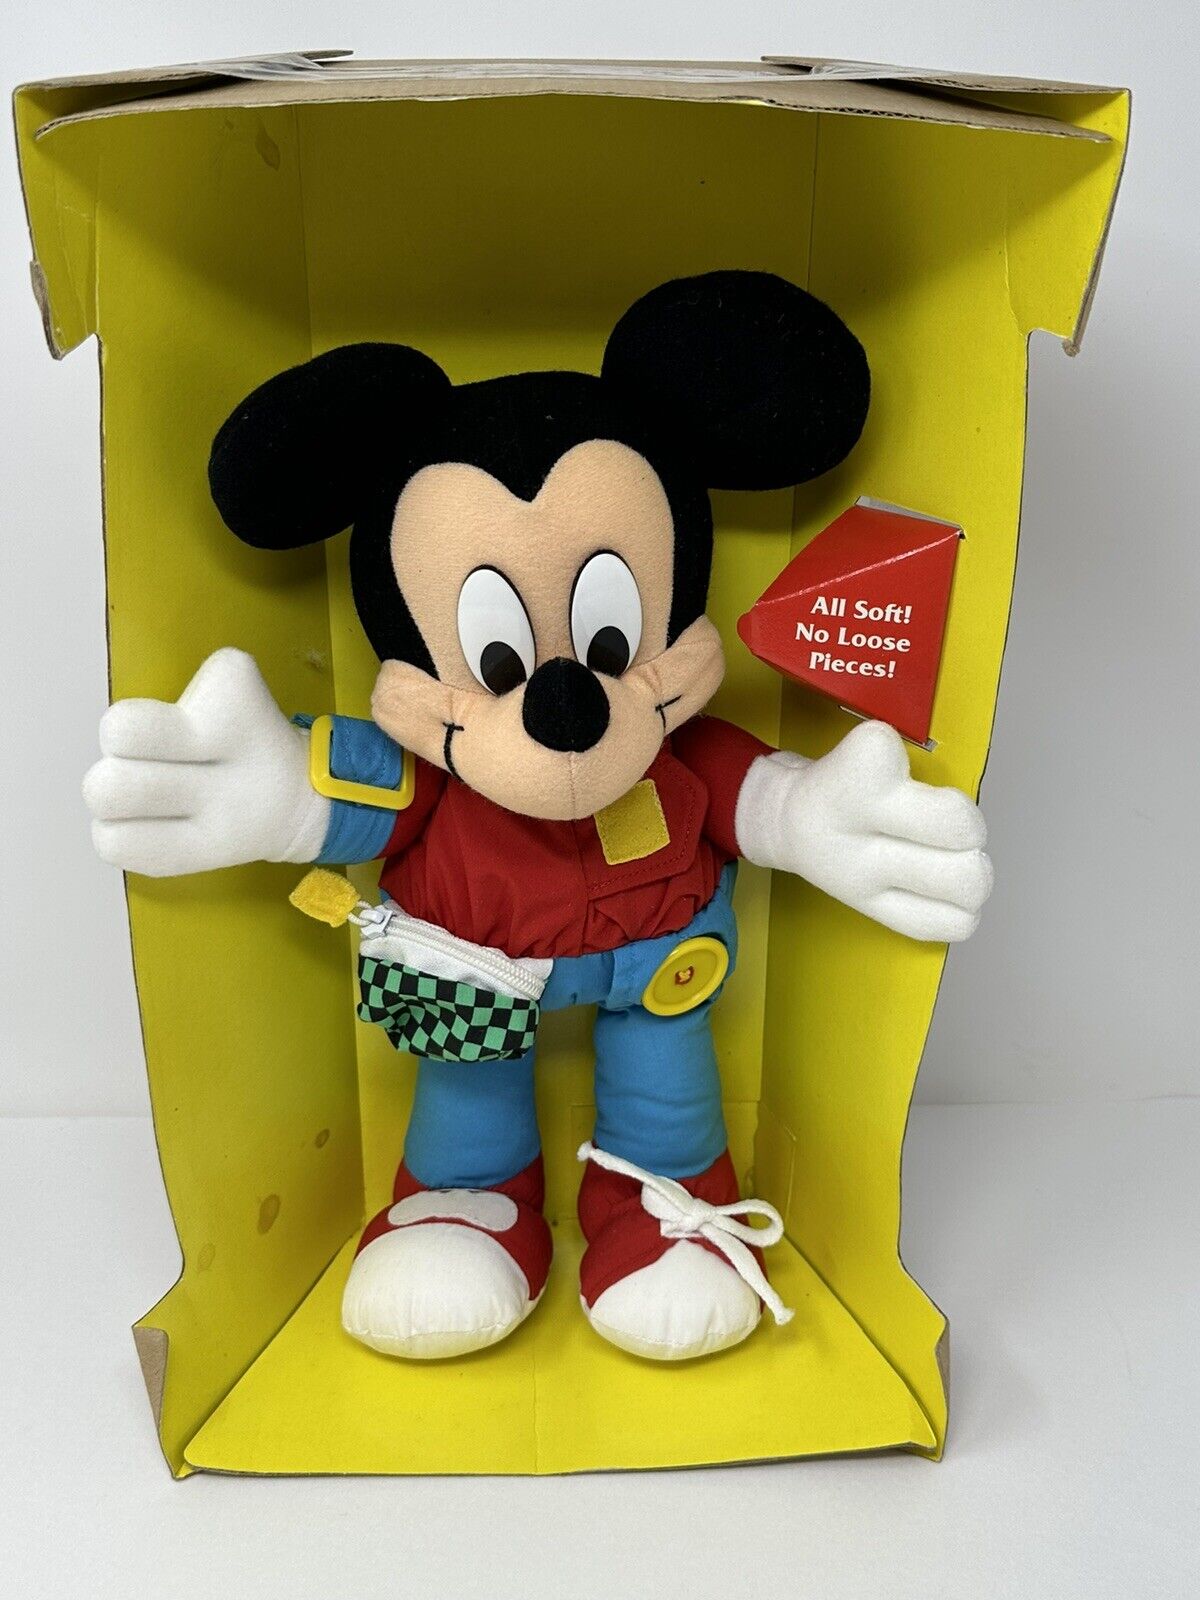 1992 Mickey Mouse 15 Inch Learn to Dress Me Doll Plush Mattel Learning Toy